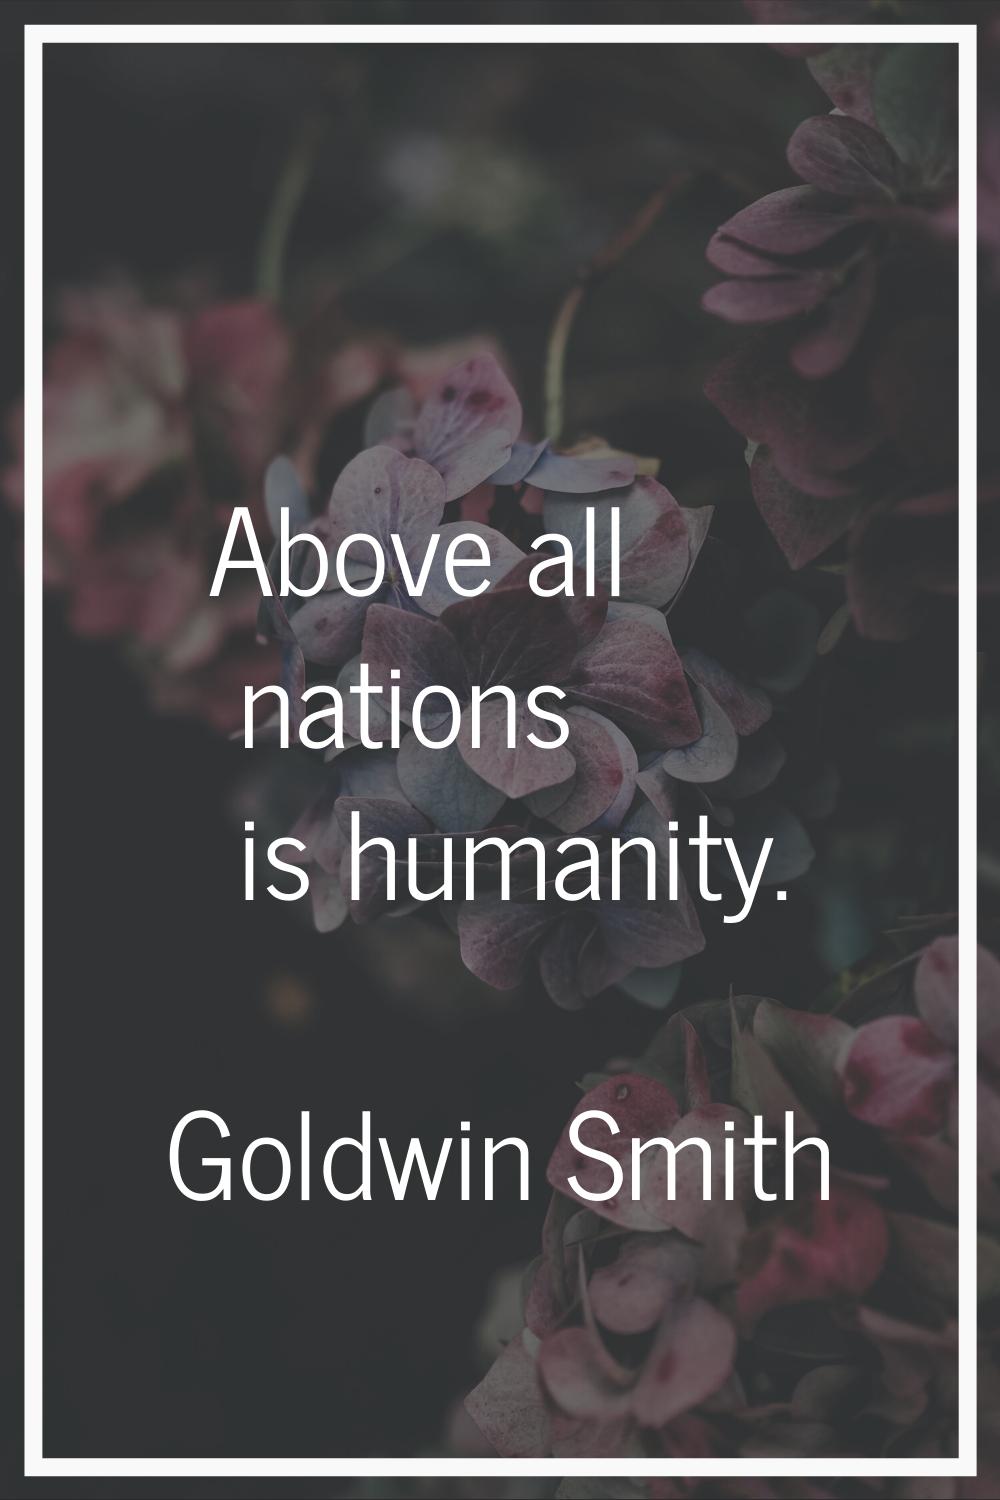 Above all nations is humanity.